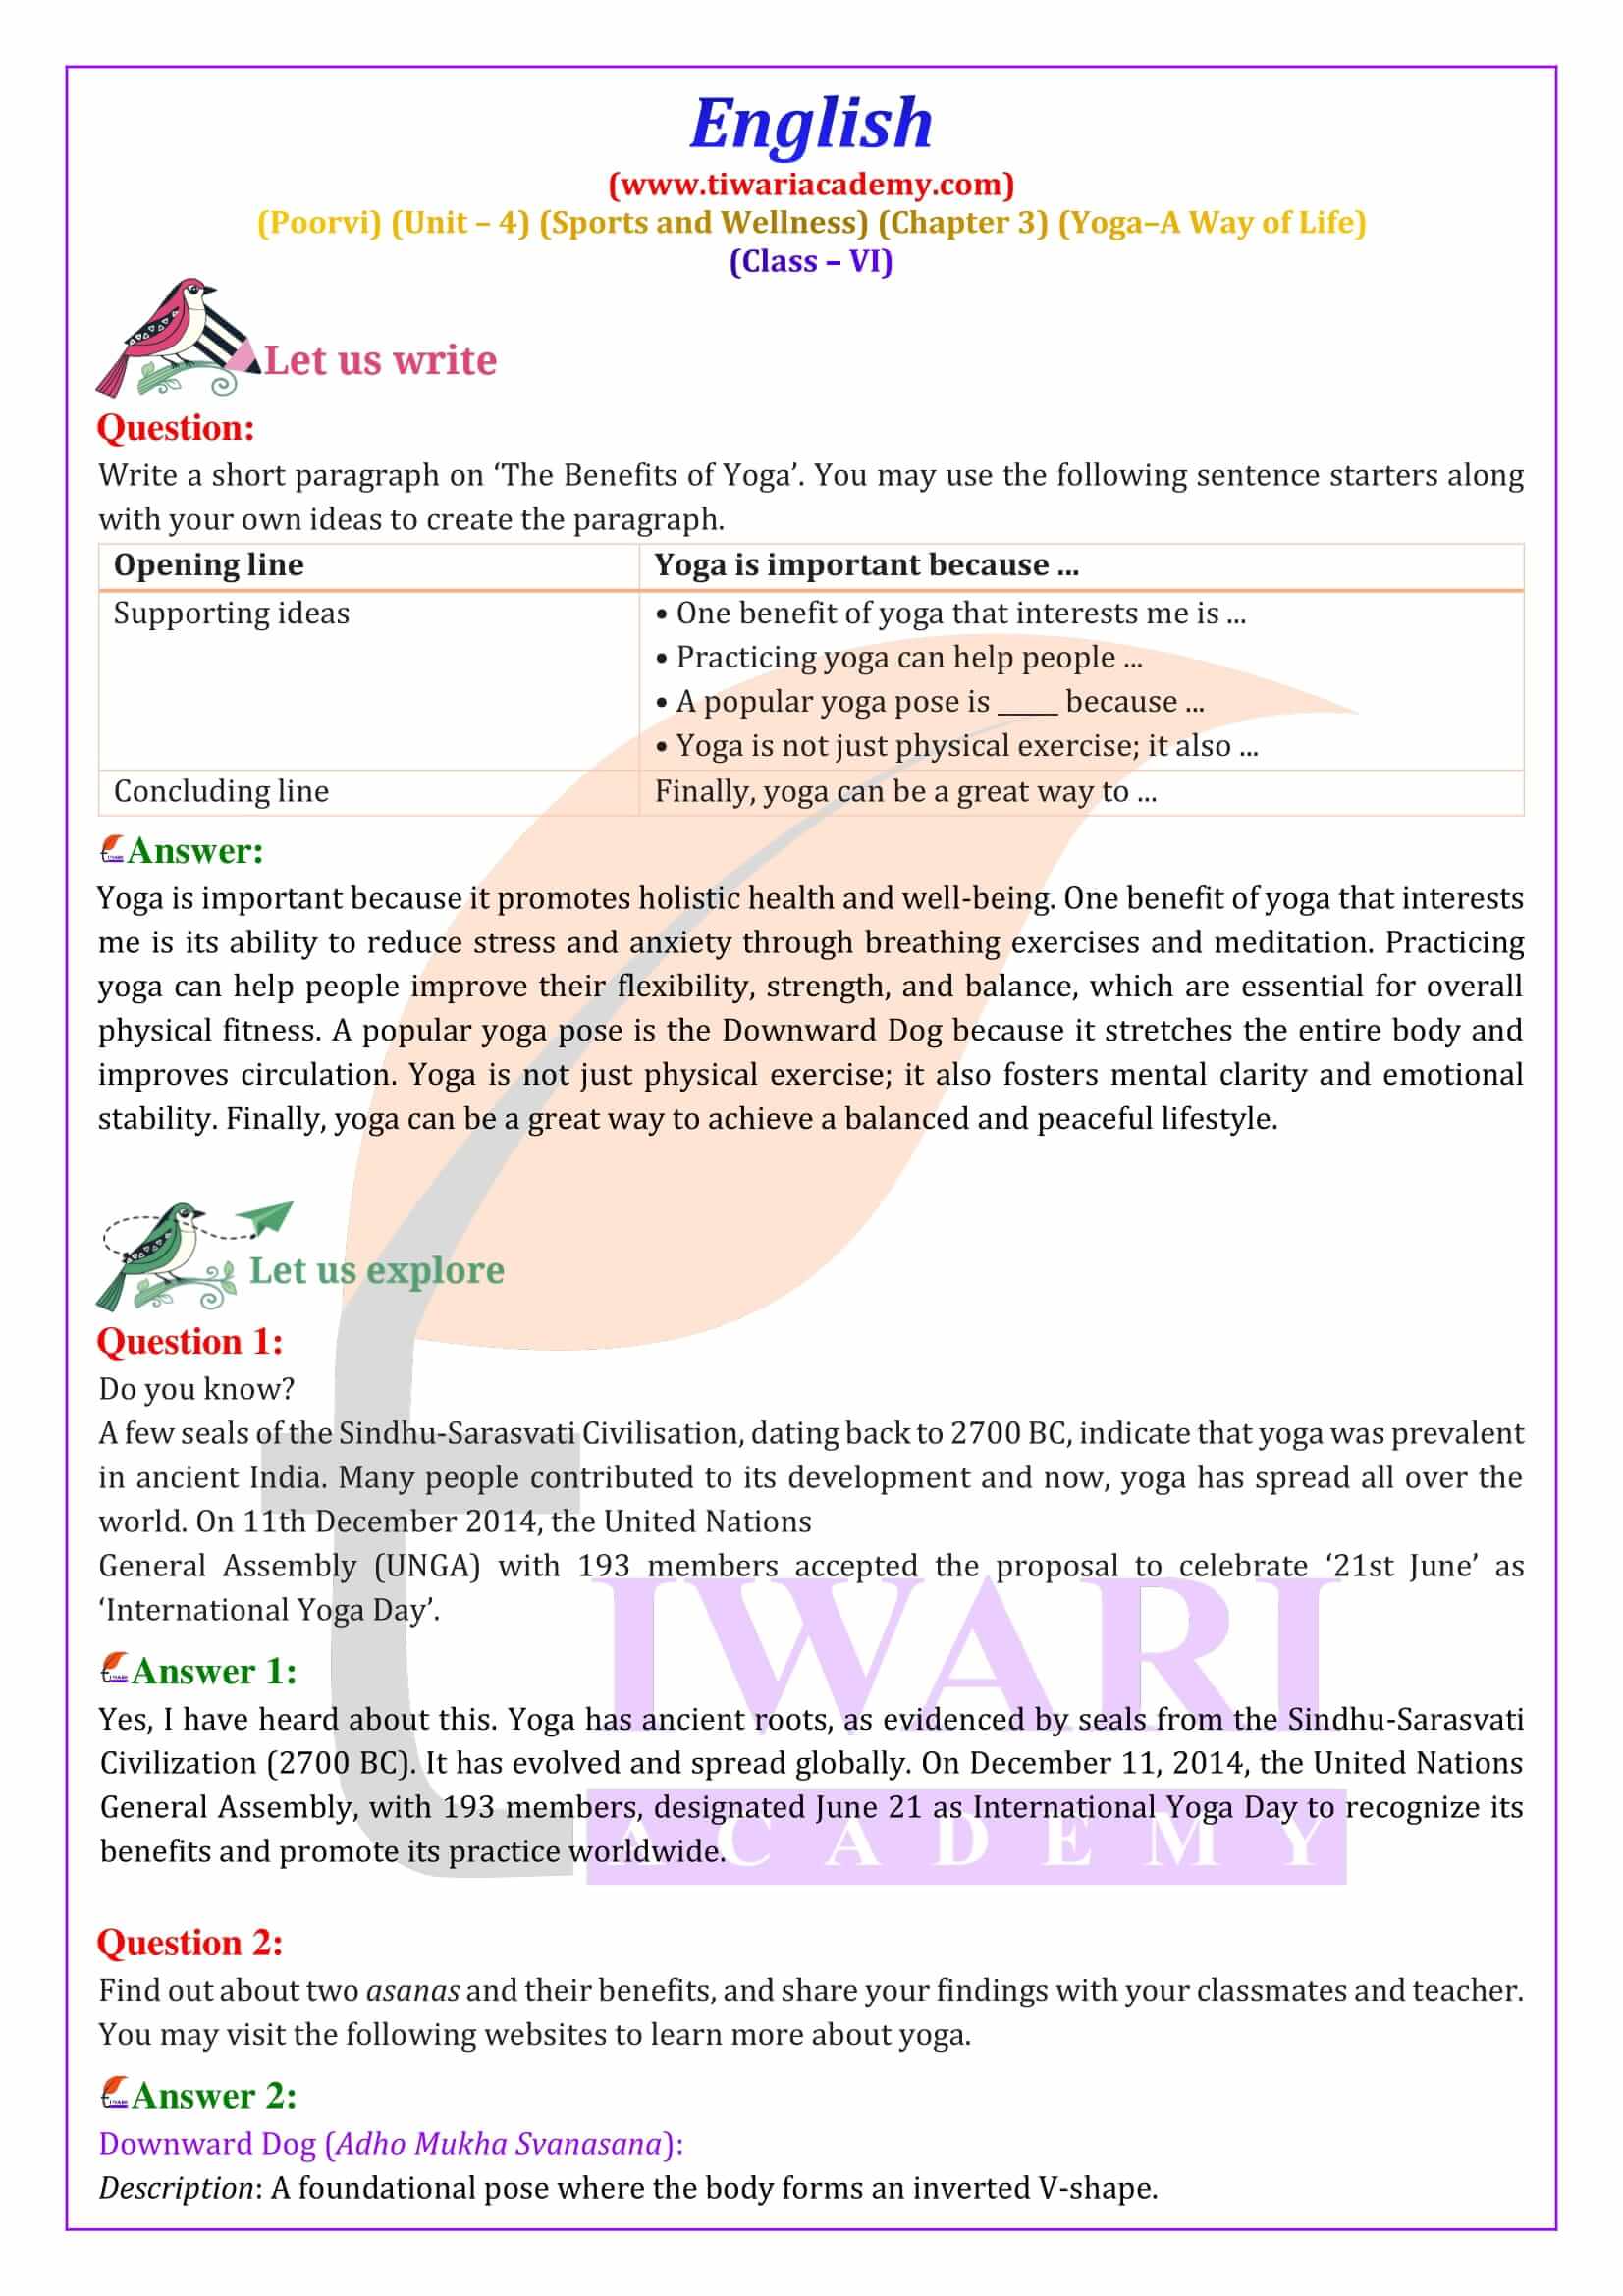 Class 6 English Poorvi Unit 4 Sports and Wellness Chapter 3 Exercises